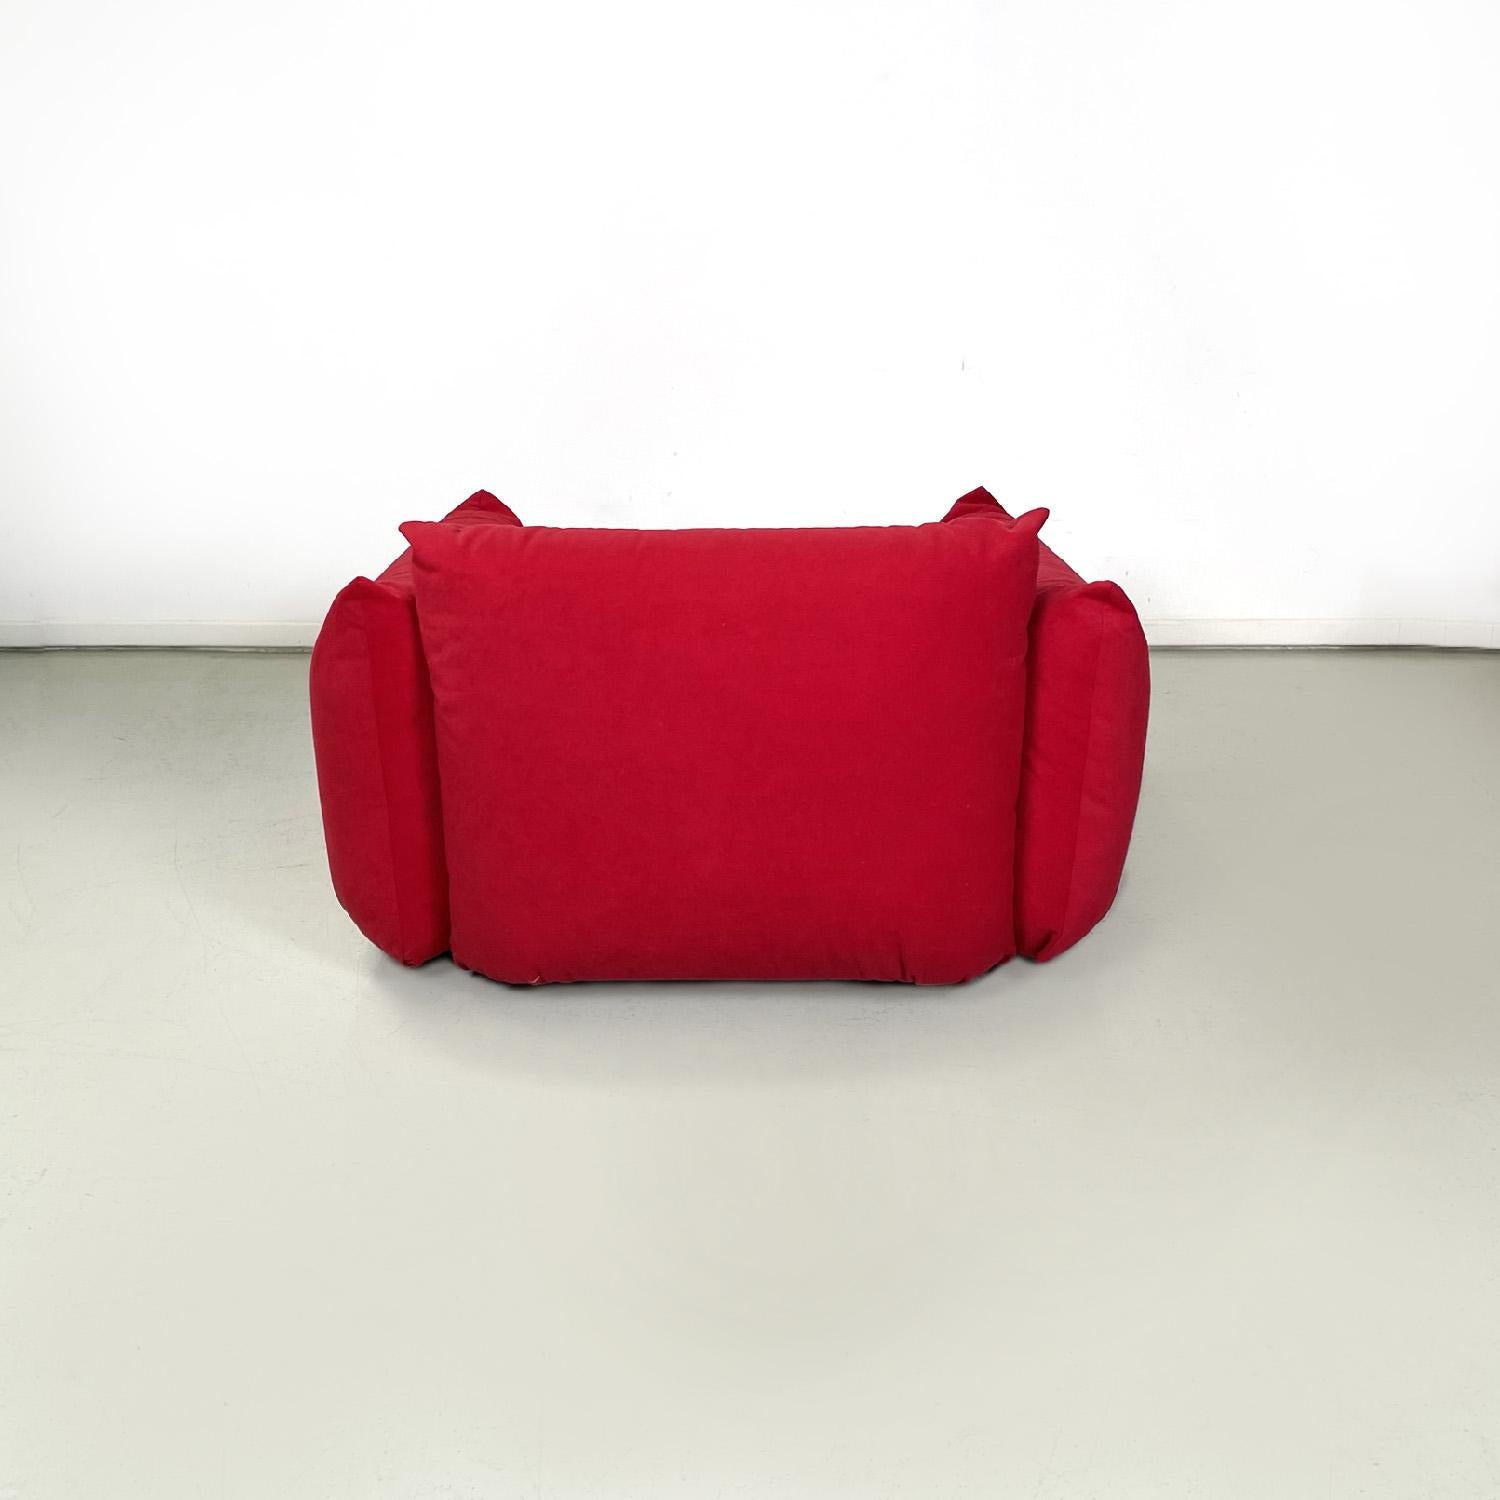 Modern Italian modern red armchair Marenco by Mario Marenco for Arflex, 1970s For Sale